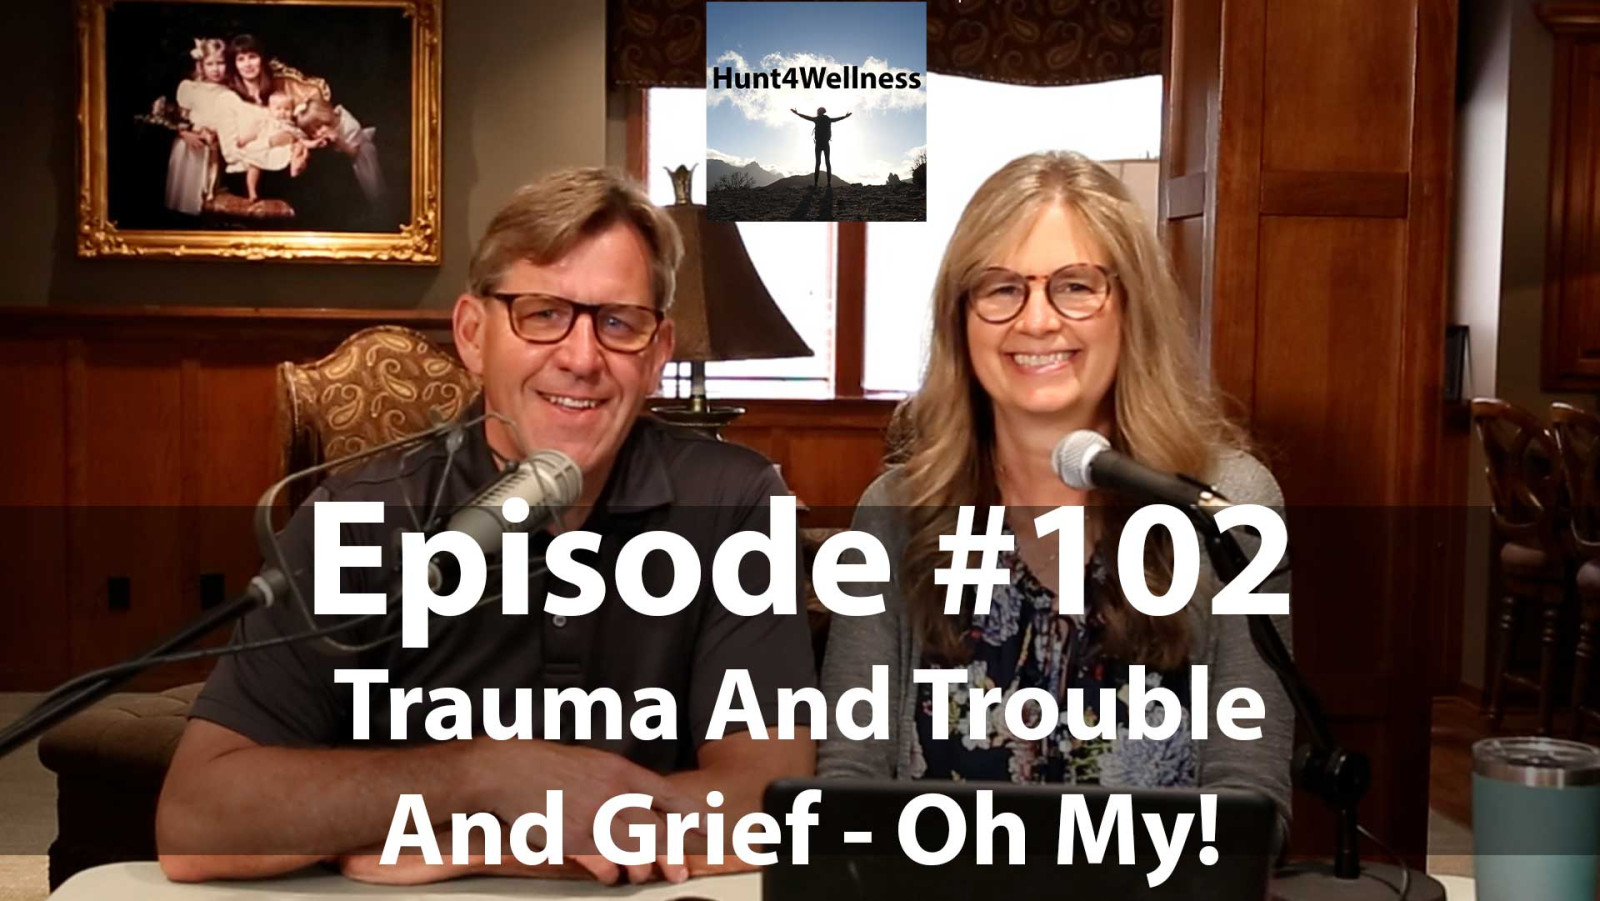 Episode #102 - Trauma And Trouble And Grief - Oh My!